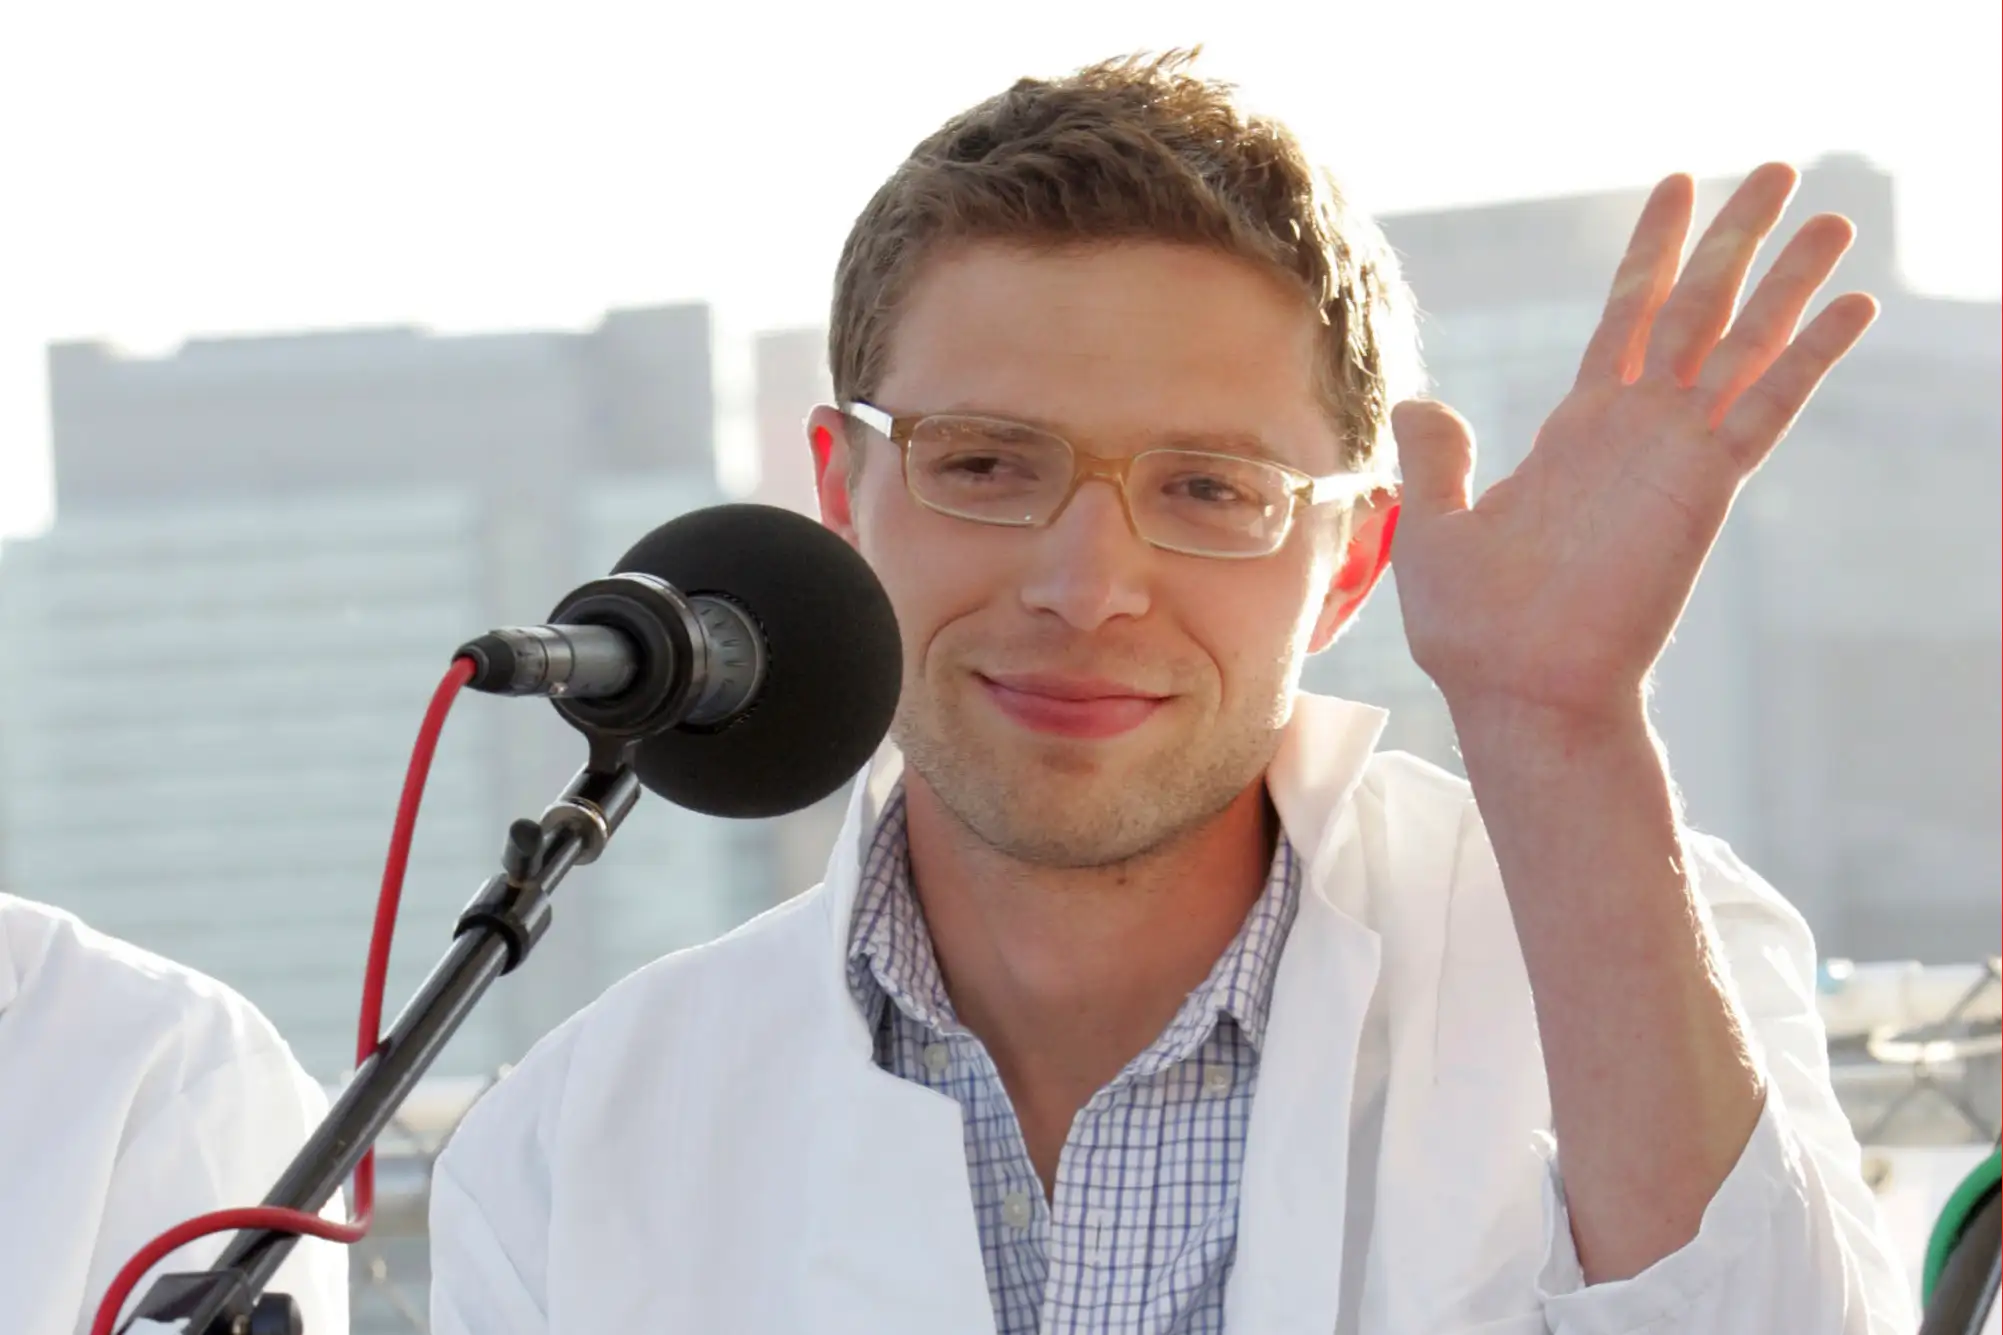 Science writer and contributer to Radio Lab, Jonah Lehrer attends the  You and Your Irrational Brain  panel discussion at Water Taxi Beach in Long Island City in conjunction with the World Science Festival on May 29, 2008 in New York City.